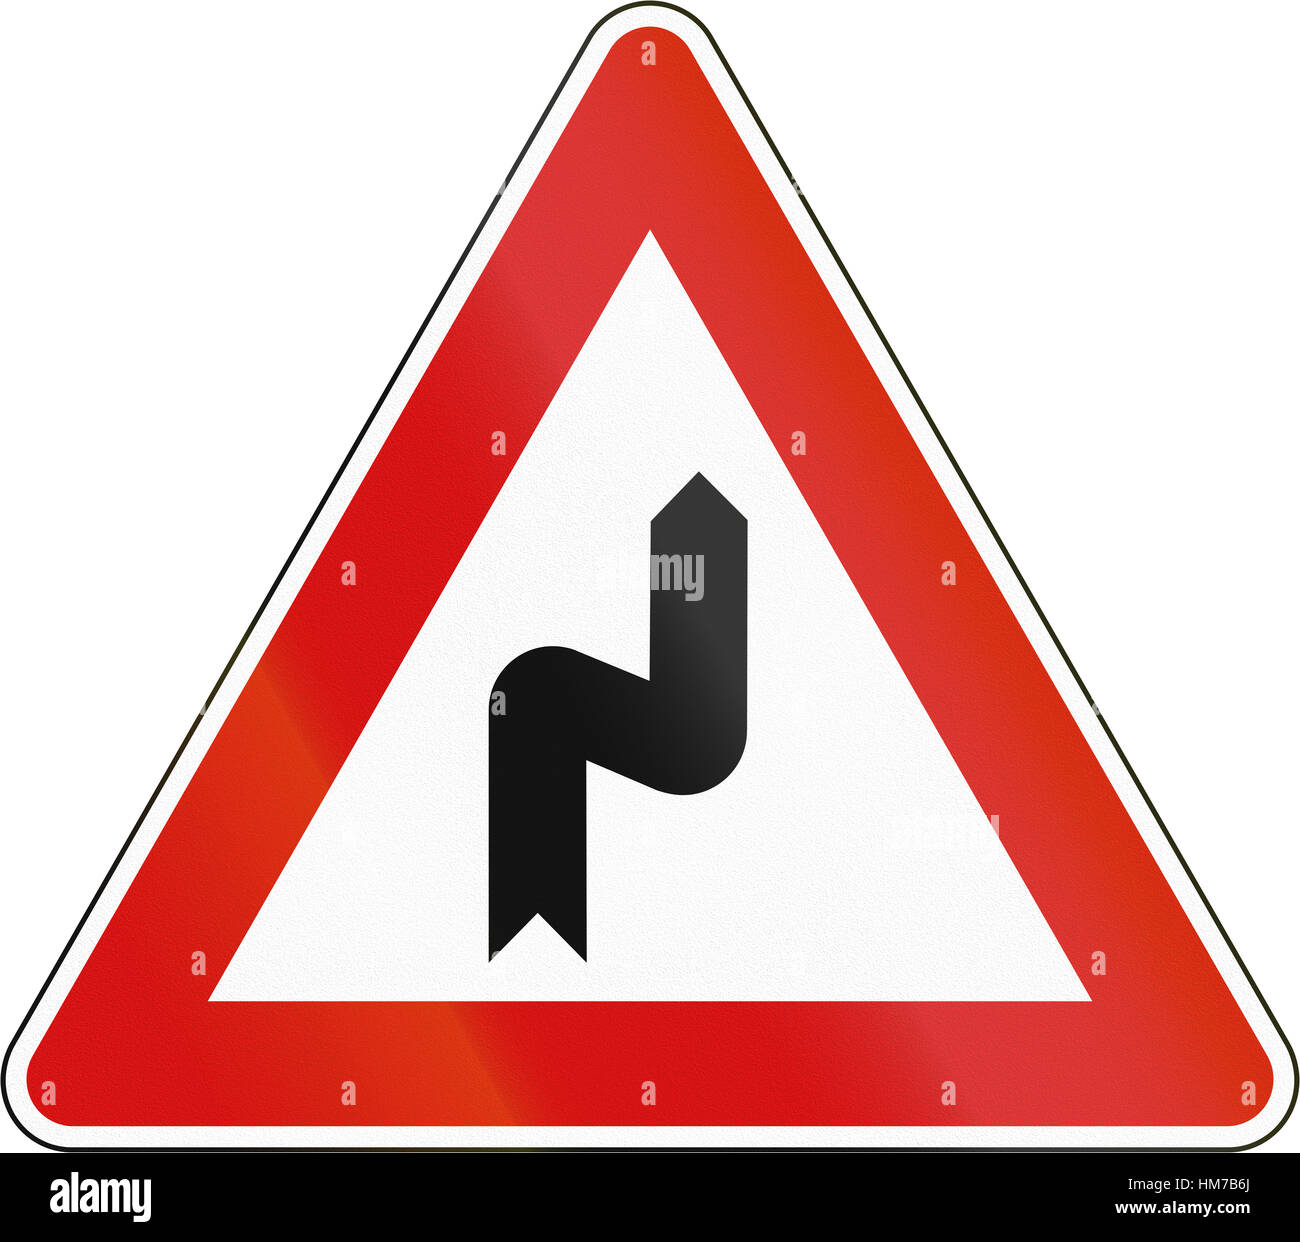 Slovenia road sign - Double bend, first to right. Stock Photo